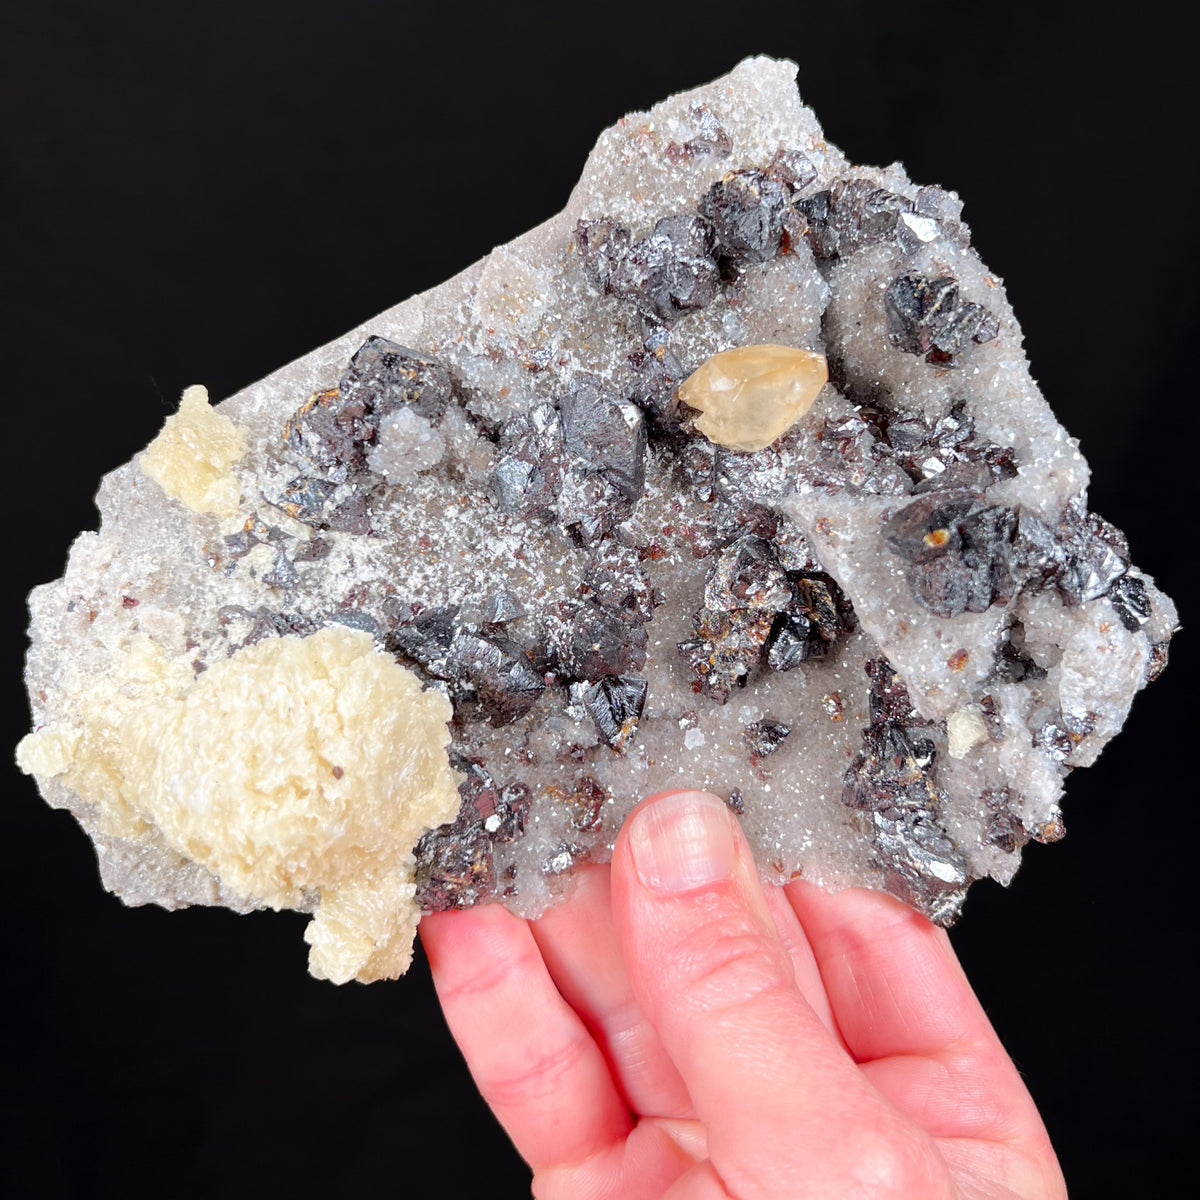 Stellar Beam Calcite on Quartz with Sphalerite and Barite from Tennessee